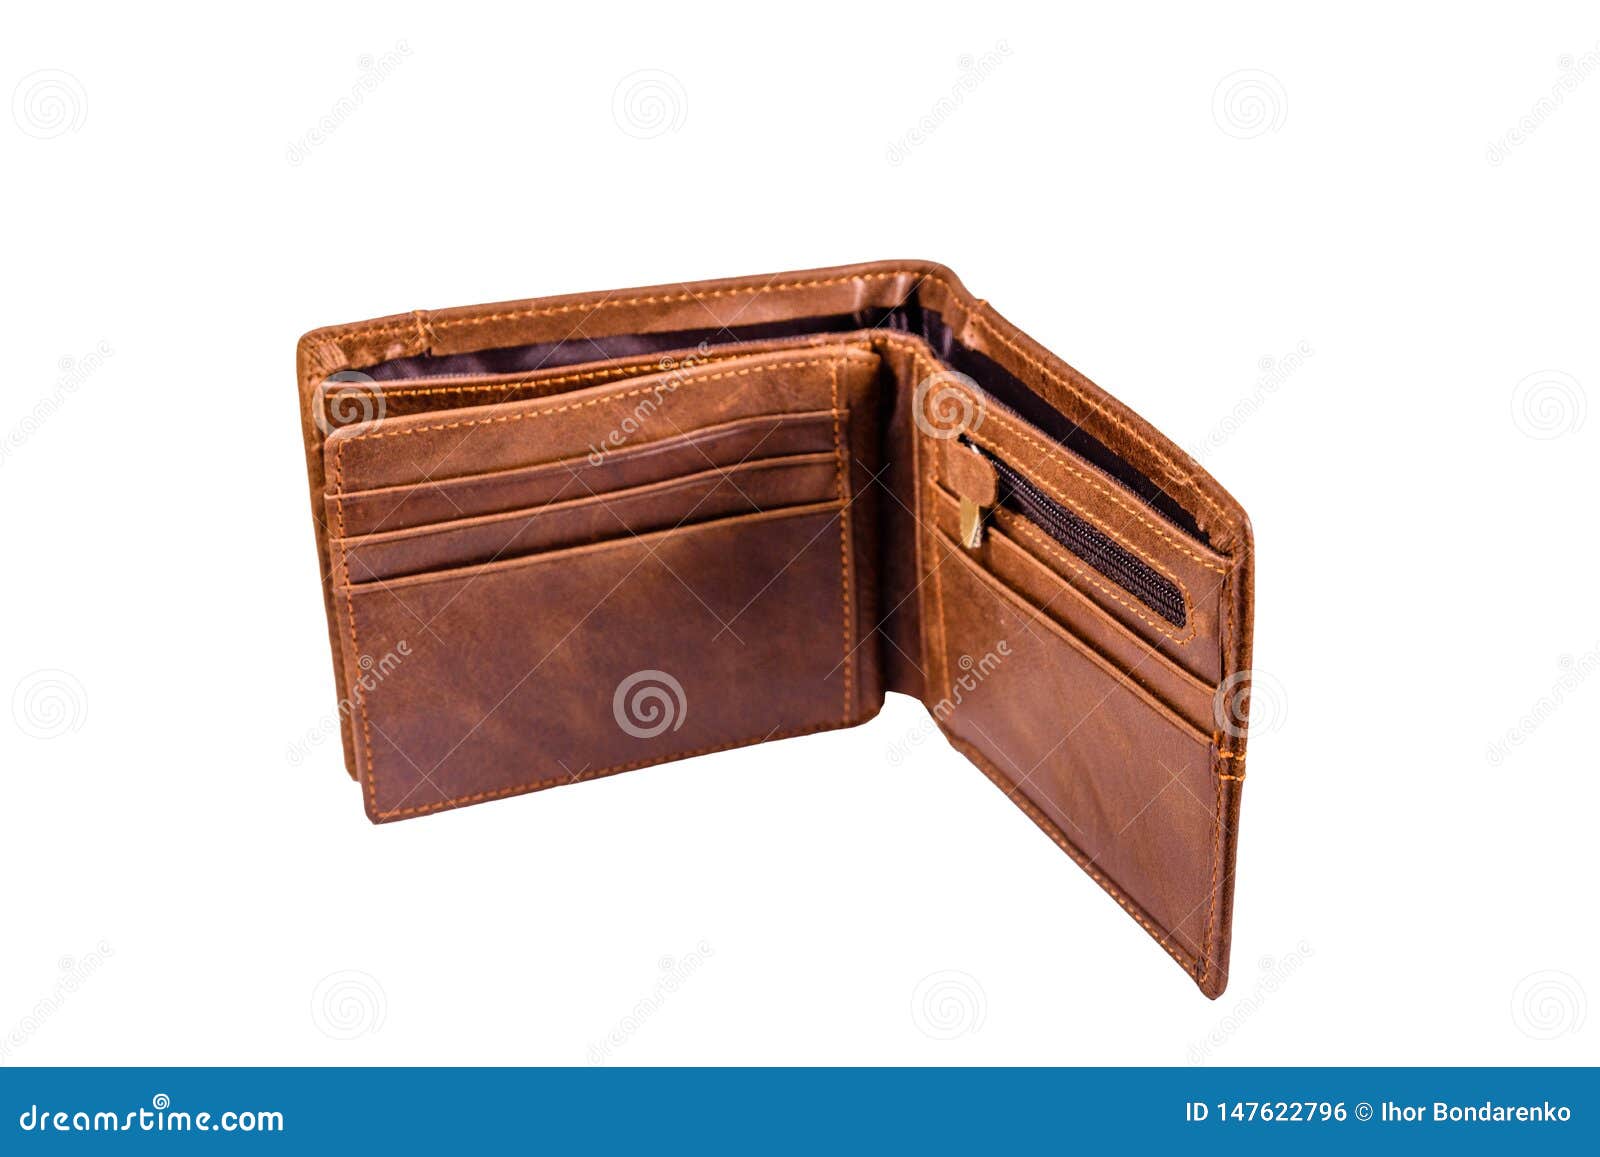 Opened Brown Leather Wallet Isolated On A White Background Stock Photo ...